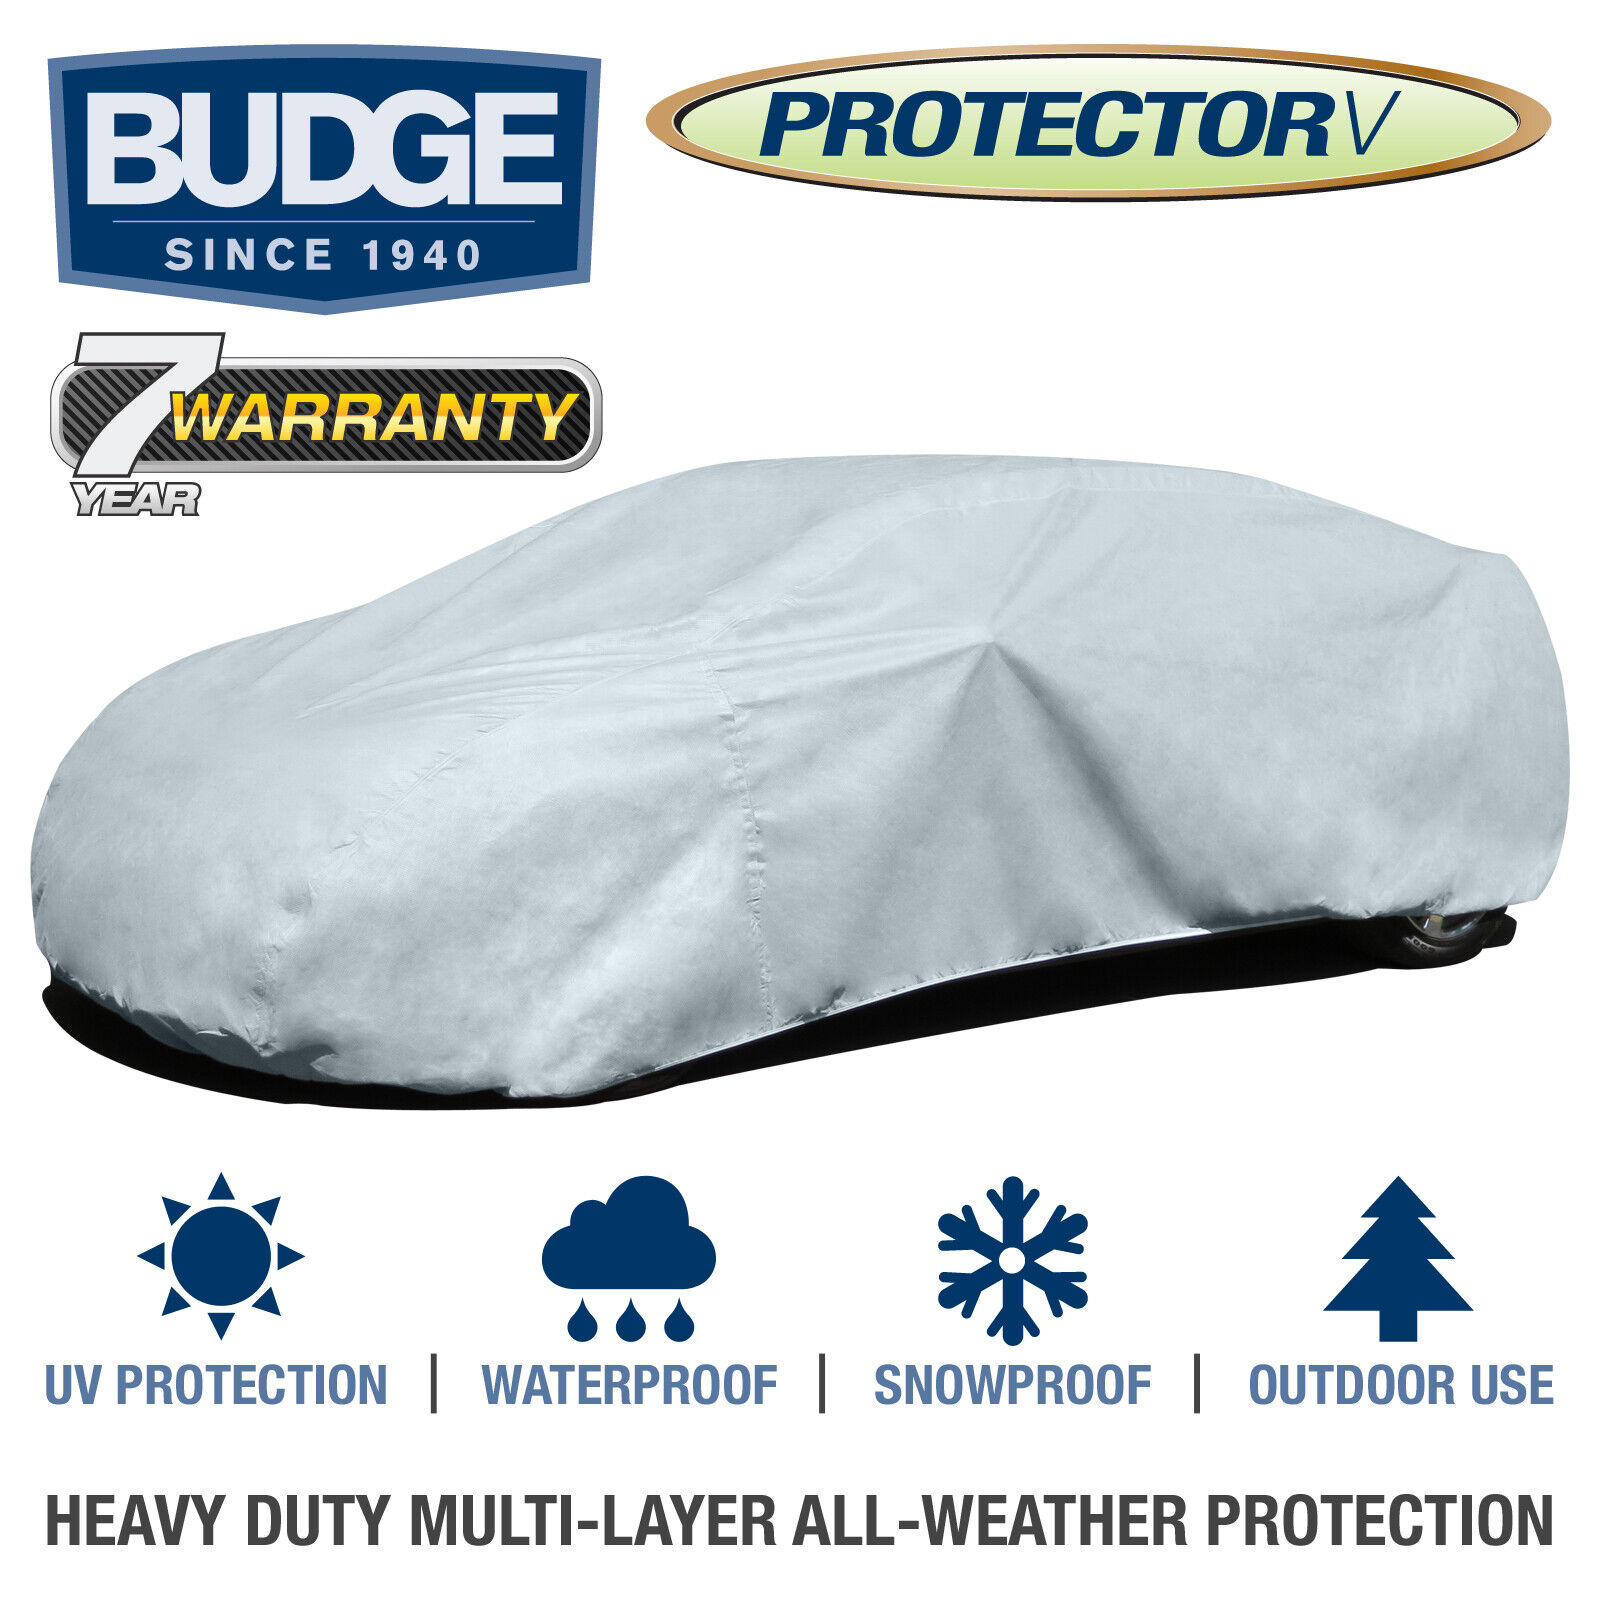 Budge Protector V Car Cover Fits Lotus Elise 2005 | Waterproof | Breathable